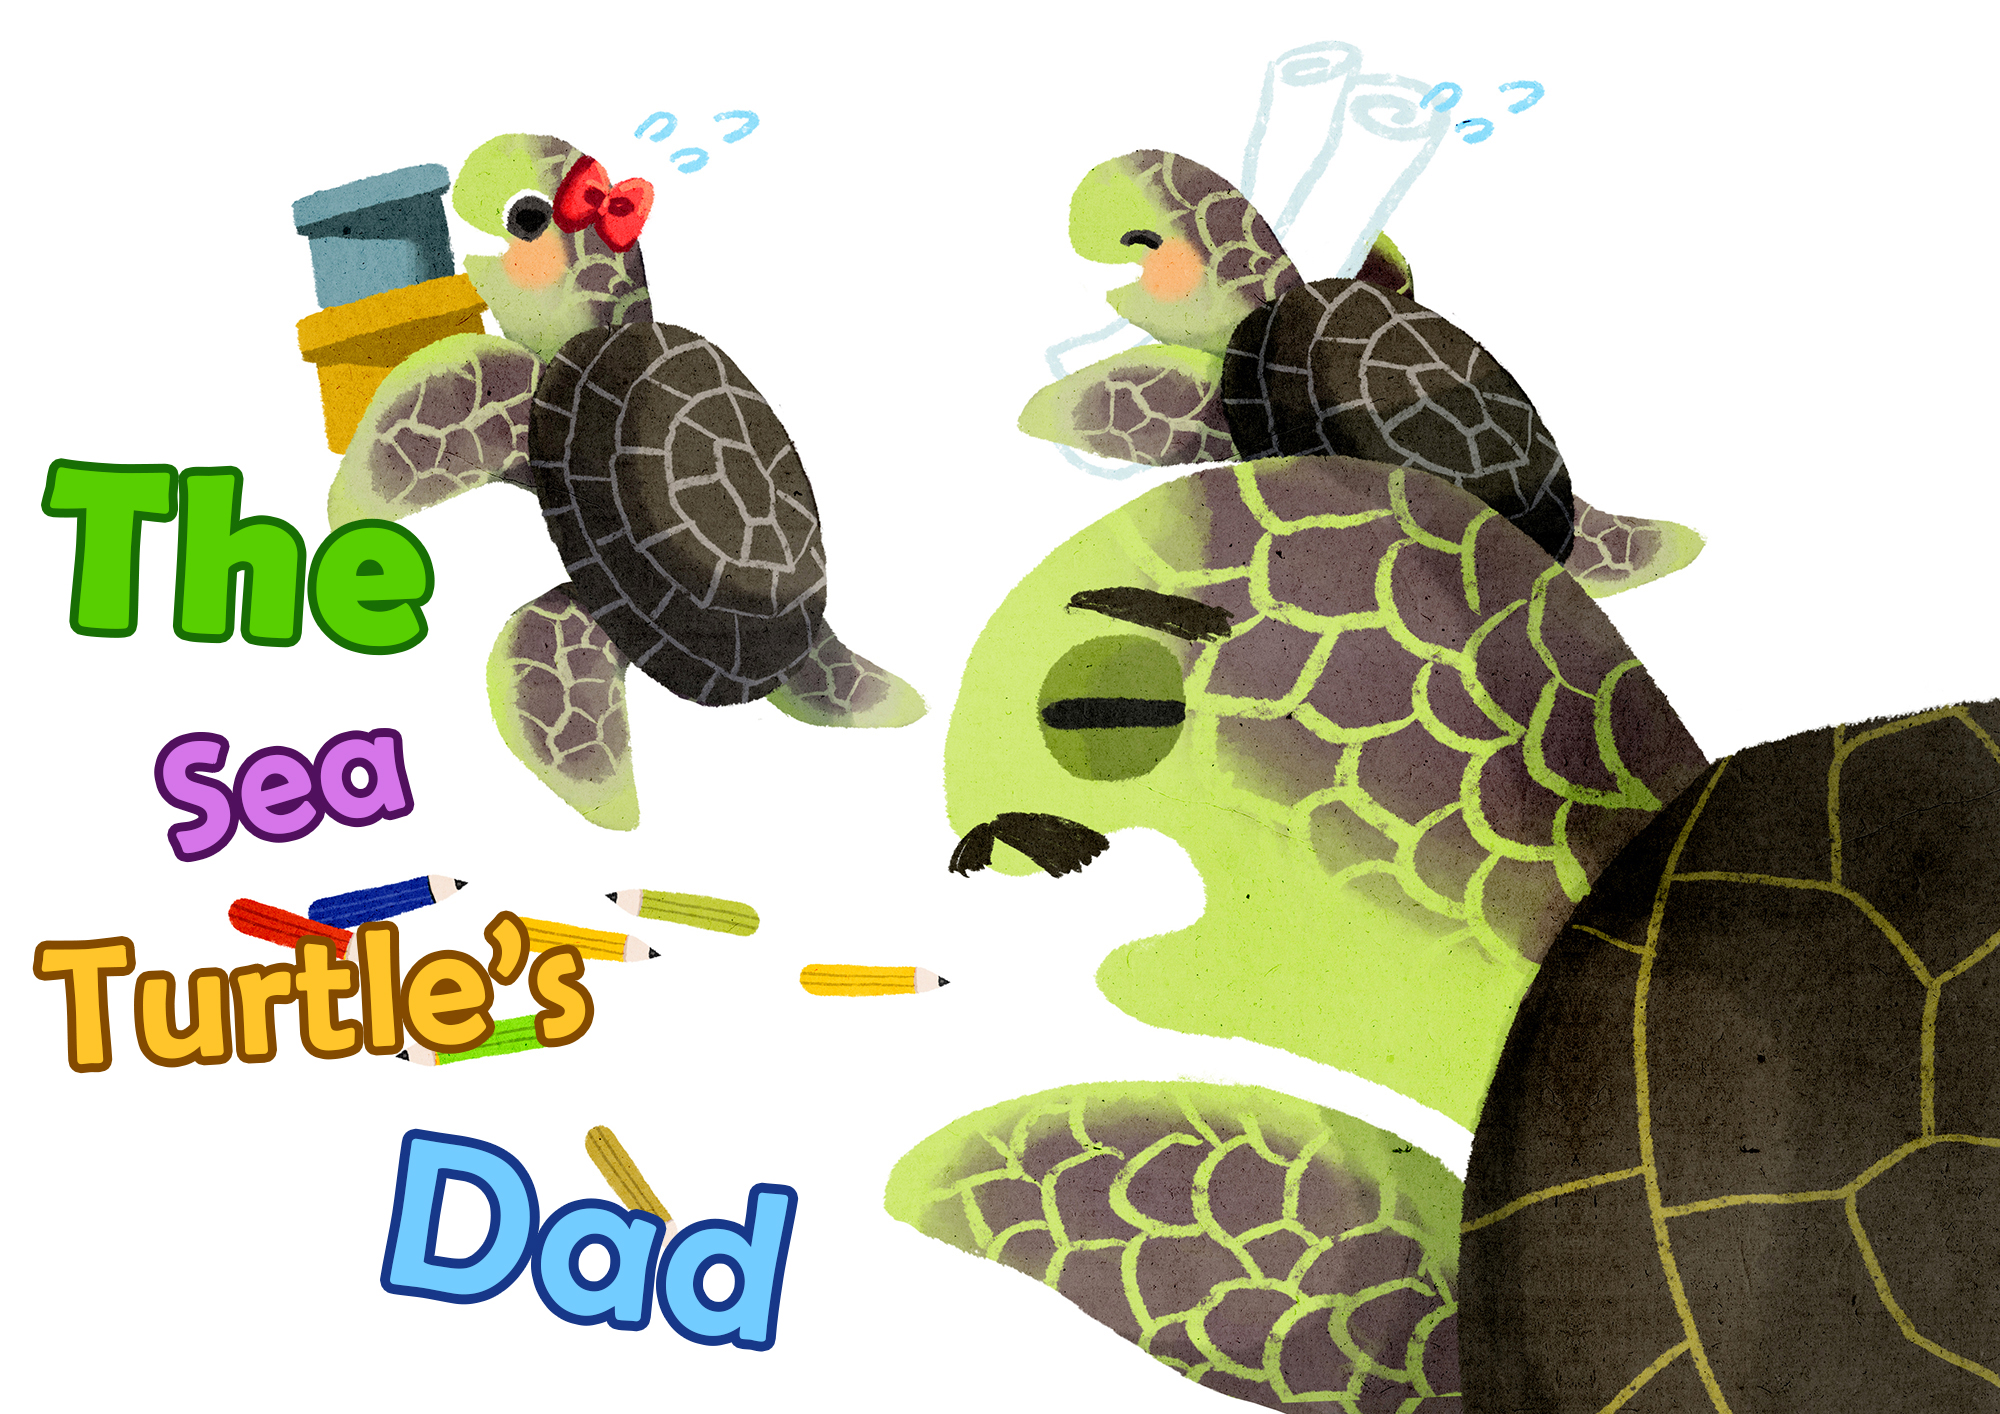 The Sea Turtle’s Dad